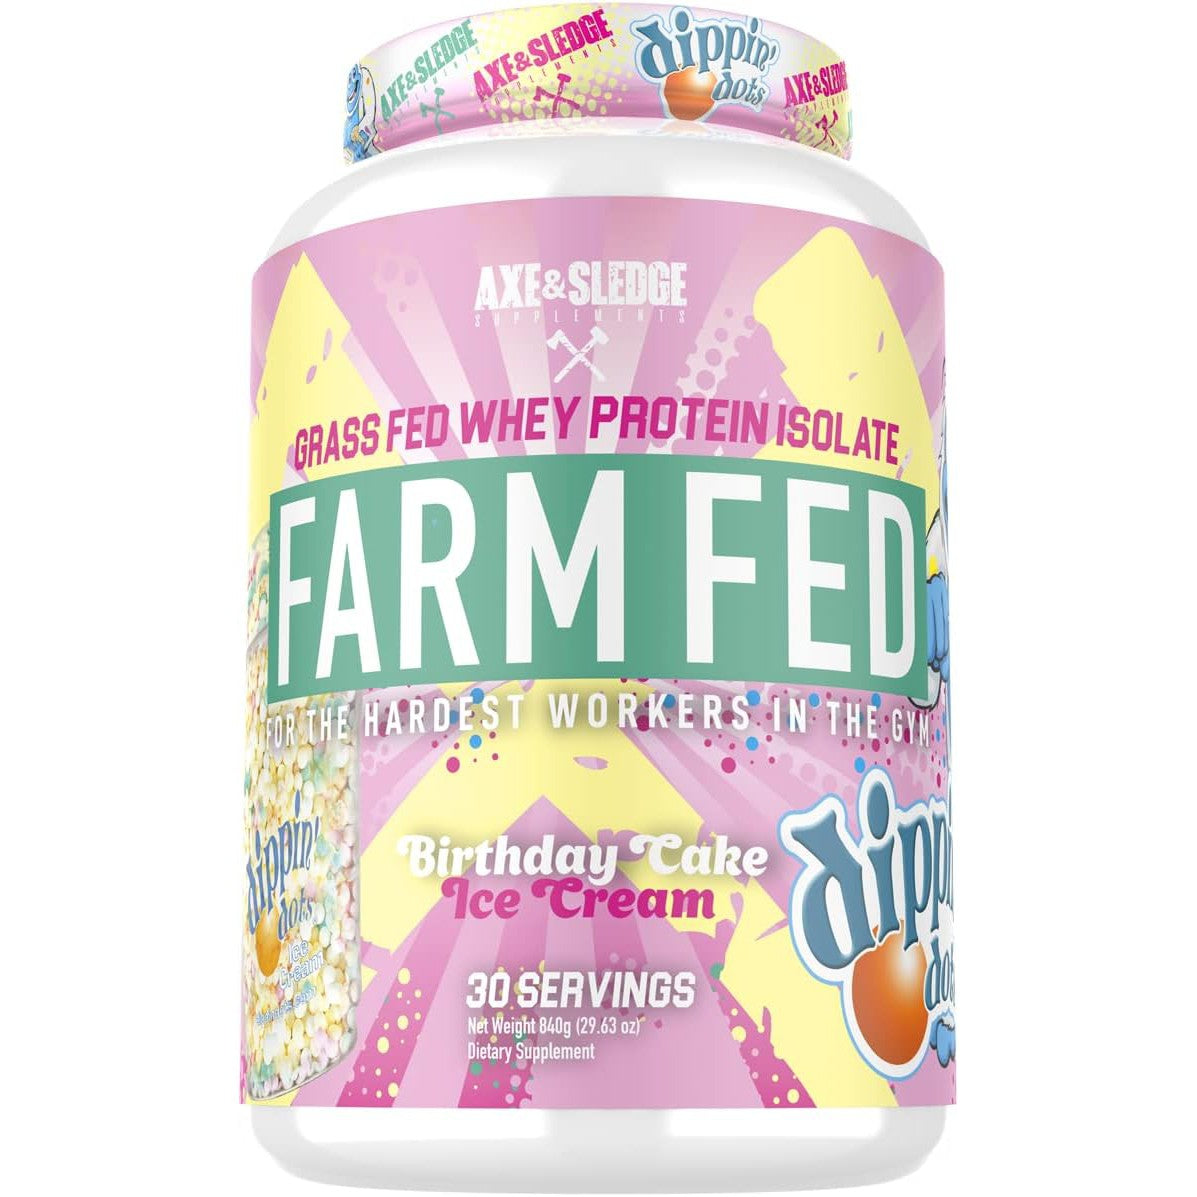 Axe & Sledge Supplements Farm Fed Grass-Fed Whey Protein Isolate with Digestive Enzymes, 22 Grams Protein, 840g 30 Servings - Dippin' Dots Birthday Cake Ice Cream